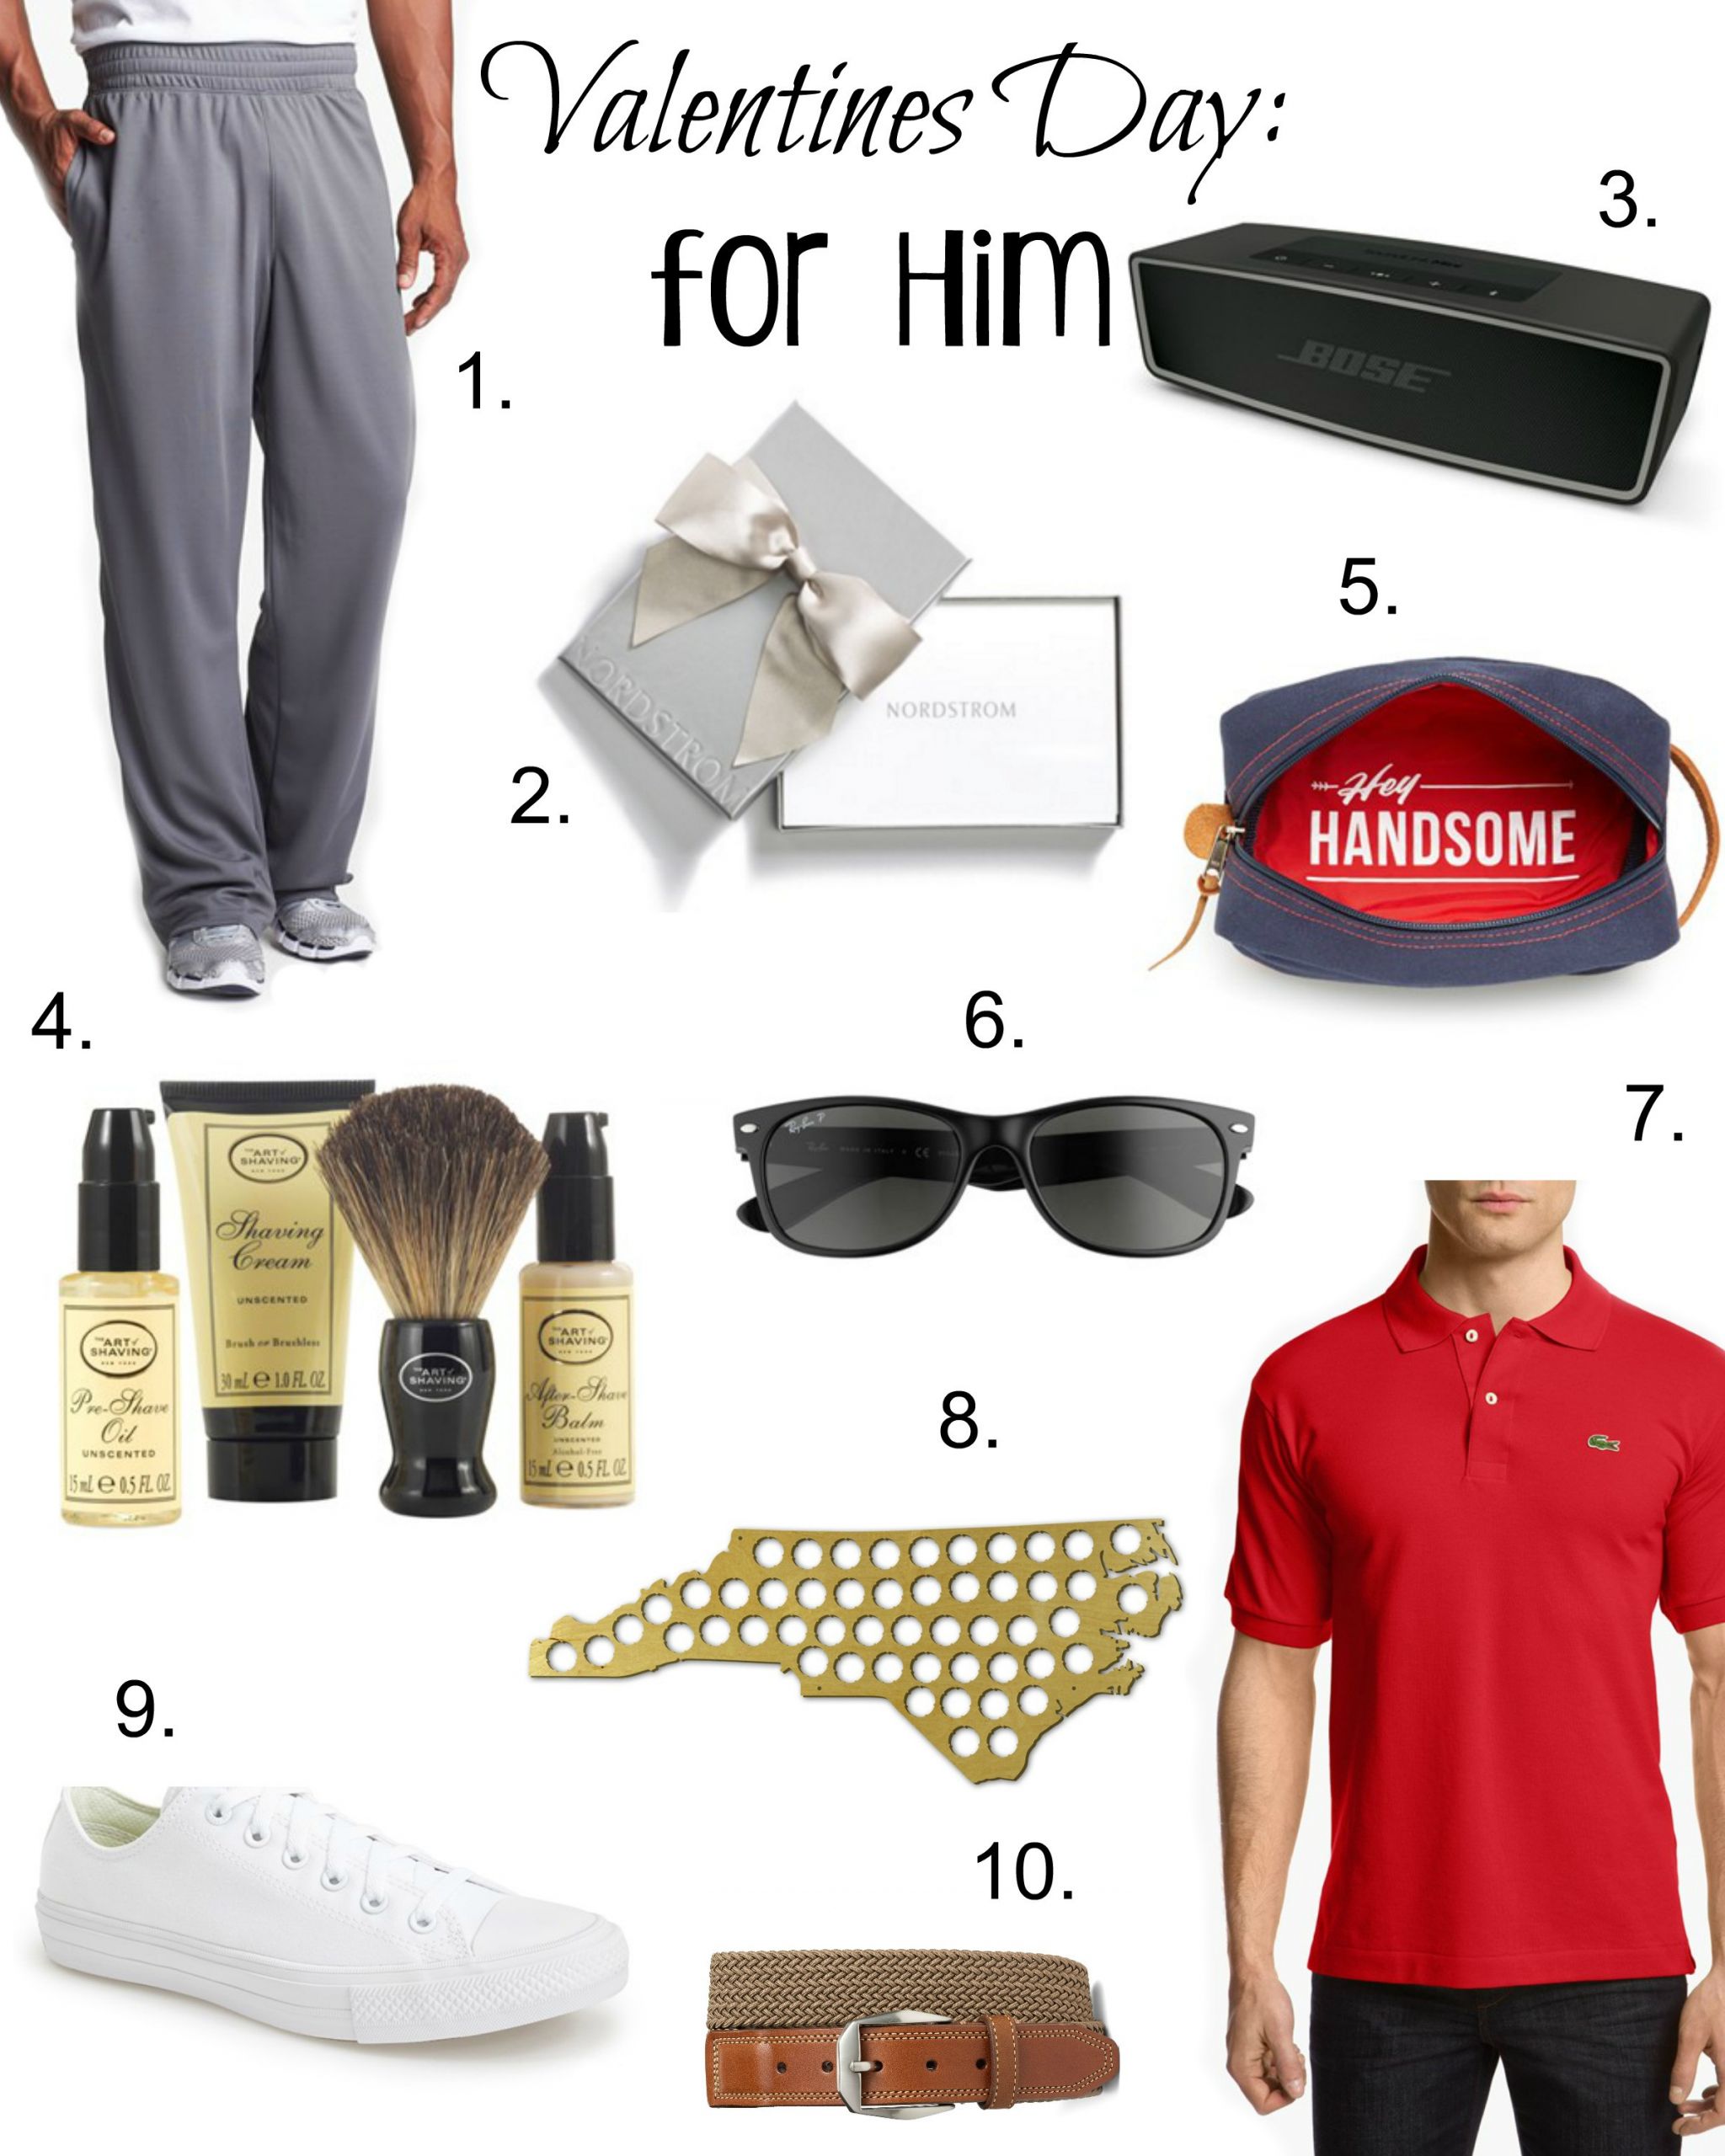 Gifts For Valentines Day
 Top 10 Valentines Day Gifts For Him